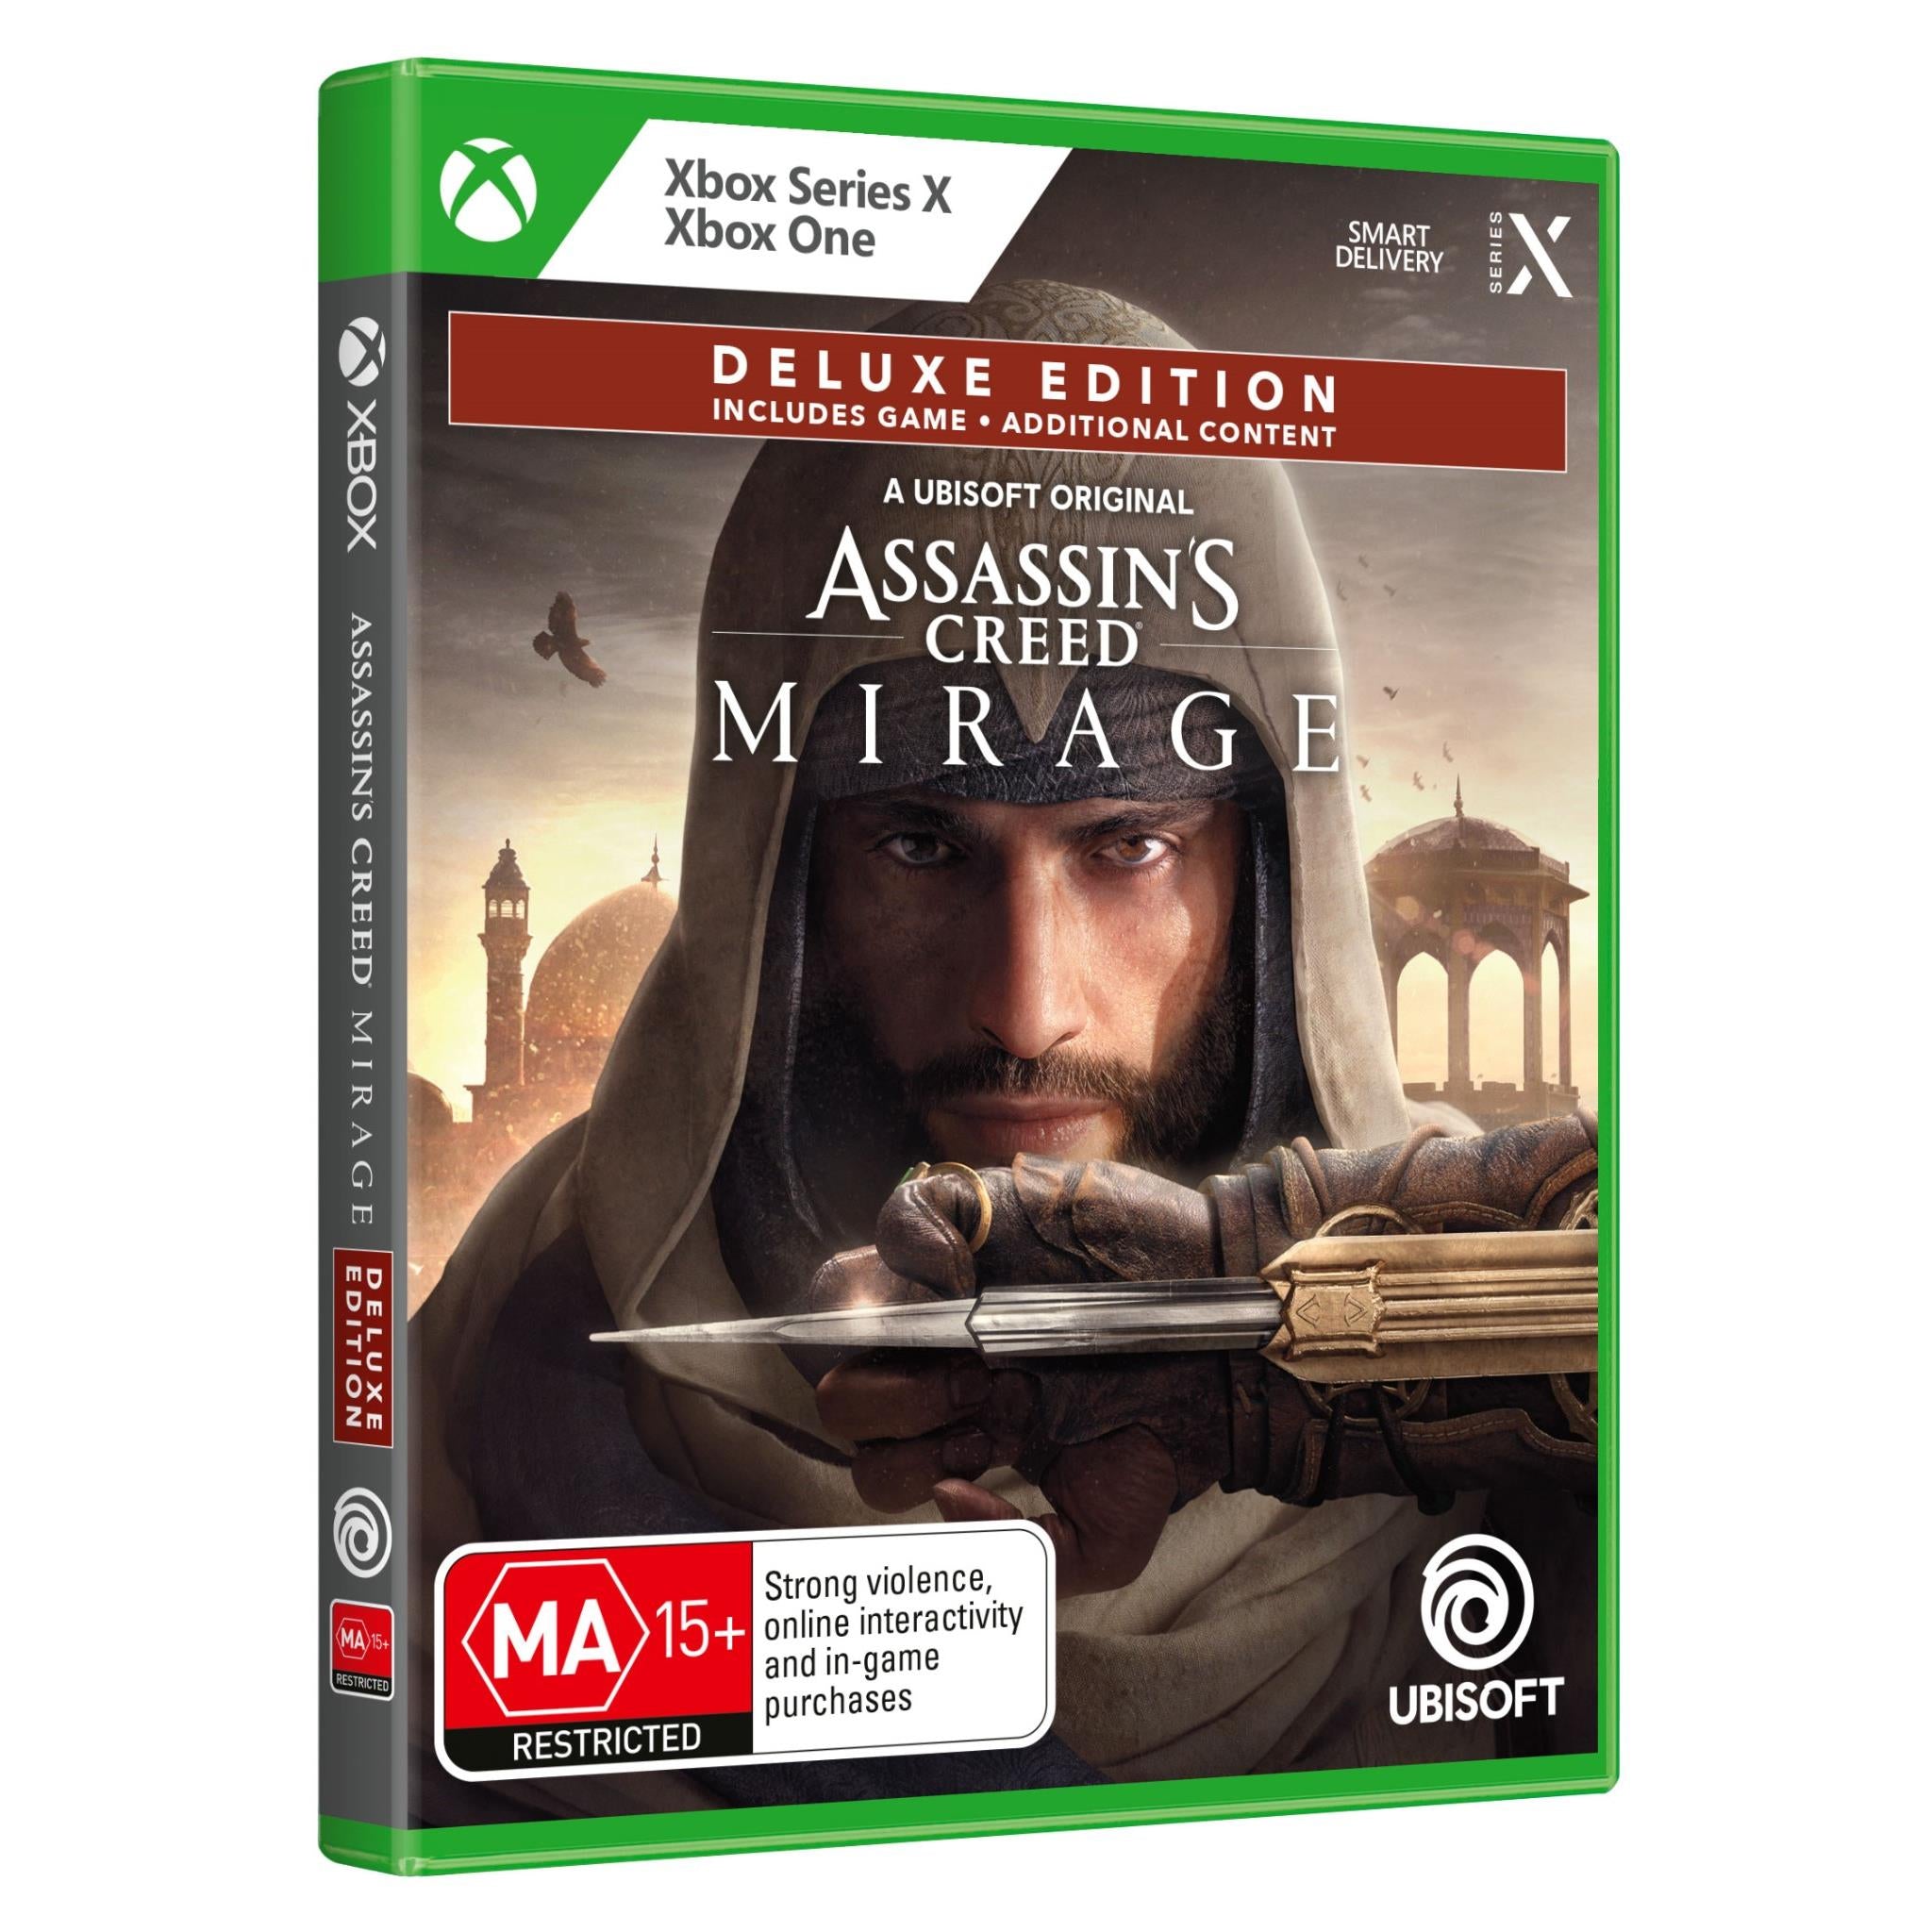 assassin's creed mirage: deluxe edition